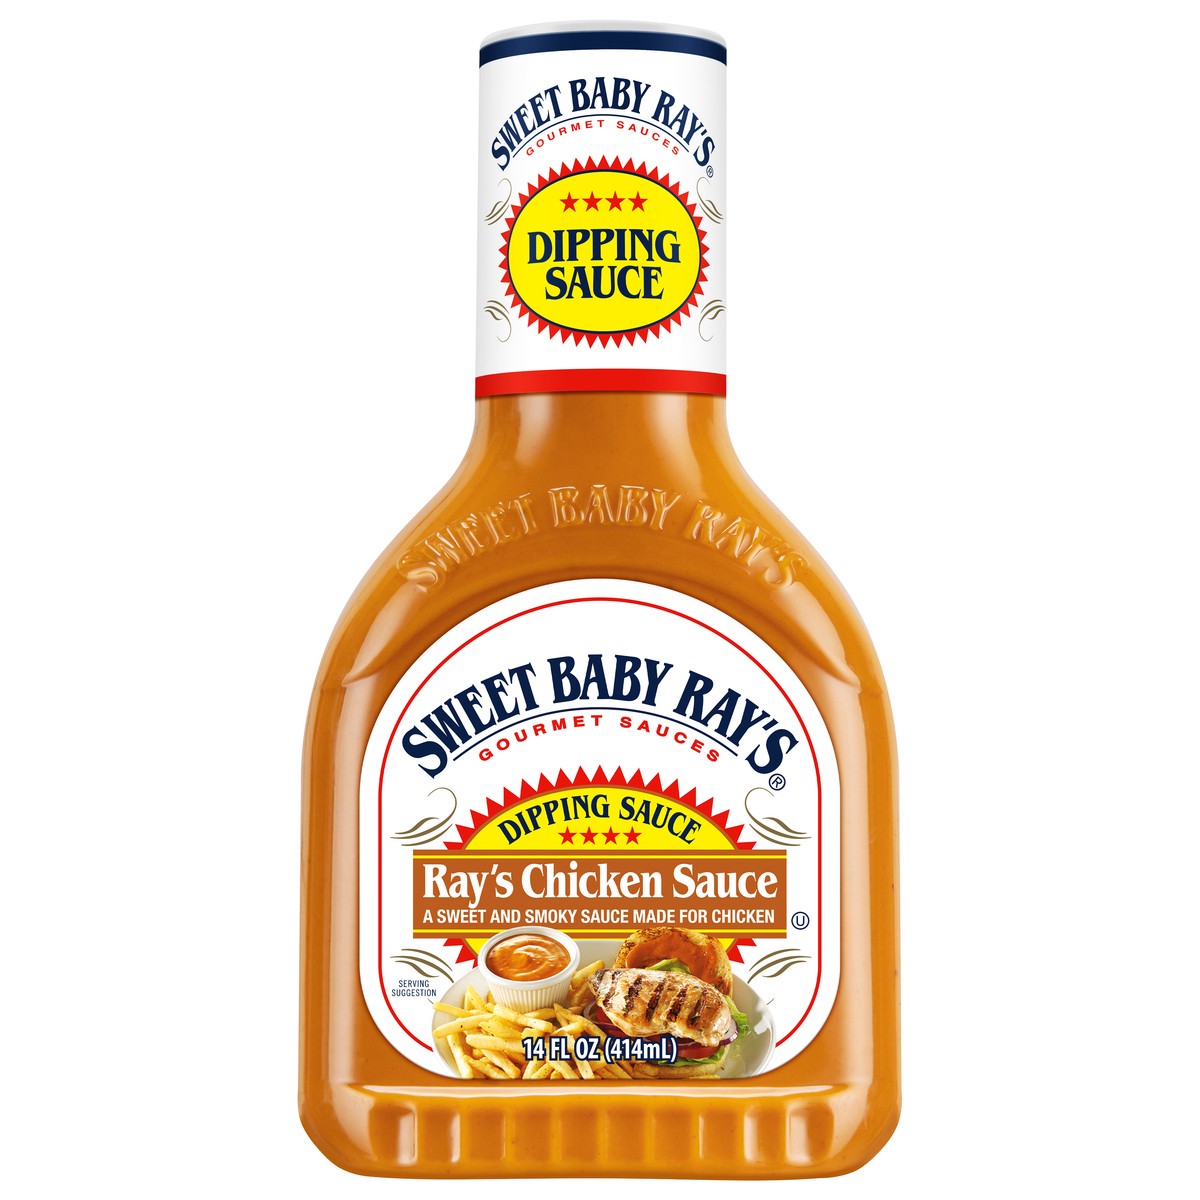 slide 1 of 7, Sweet Baby Ray's Ray's Chicken Sauce Dipping Sauce 14 fl oz, 14 fl oz